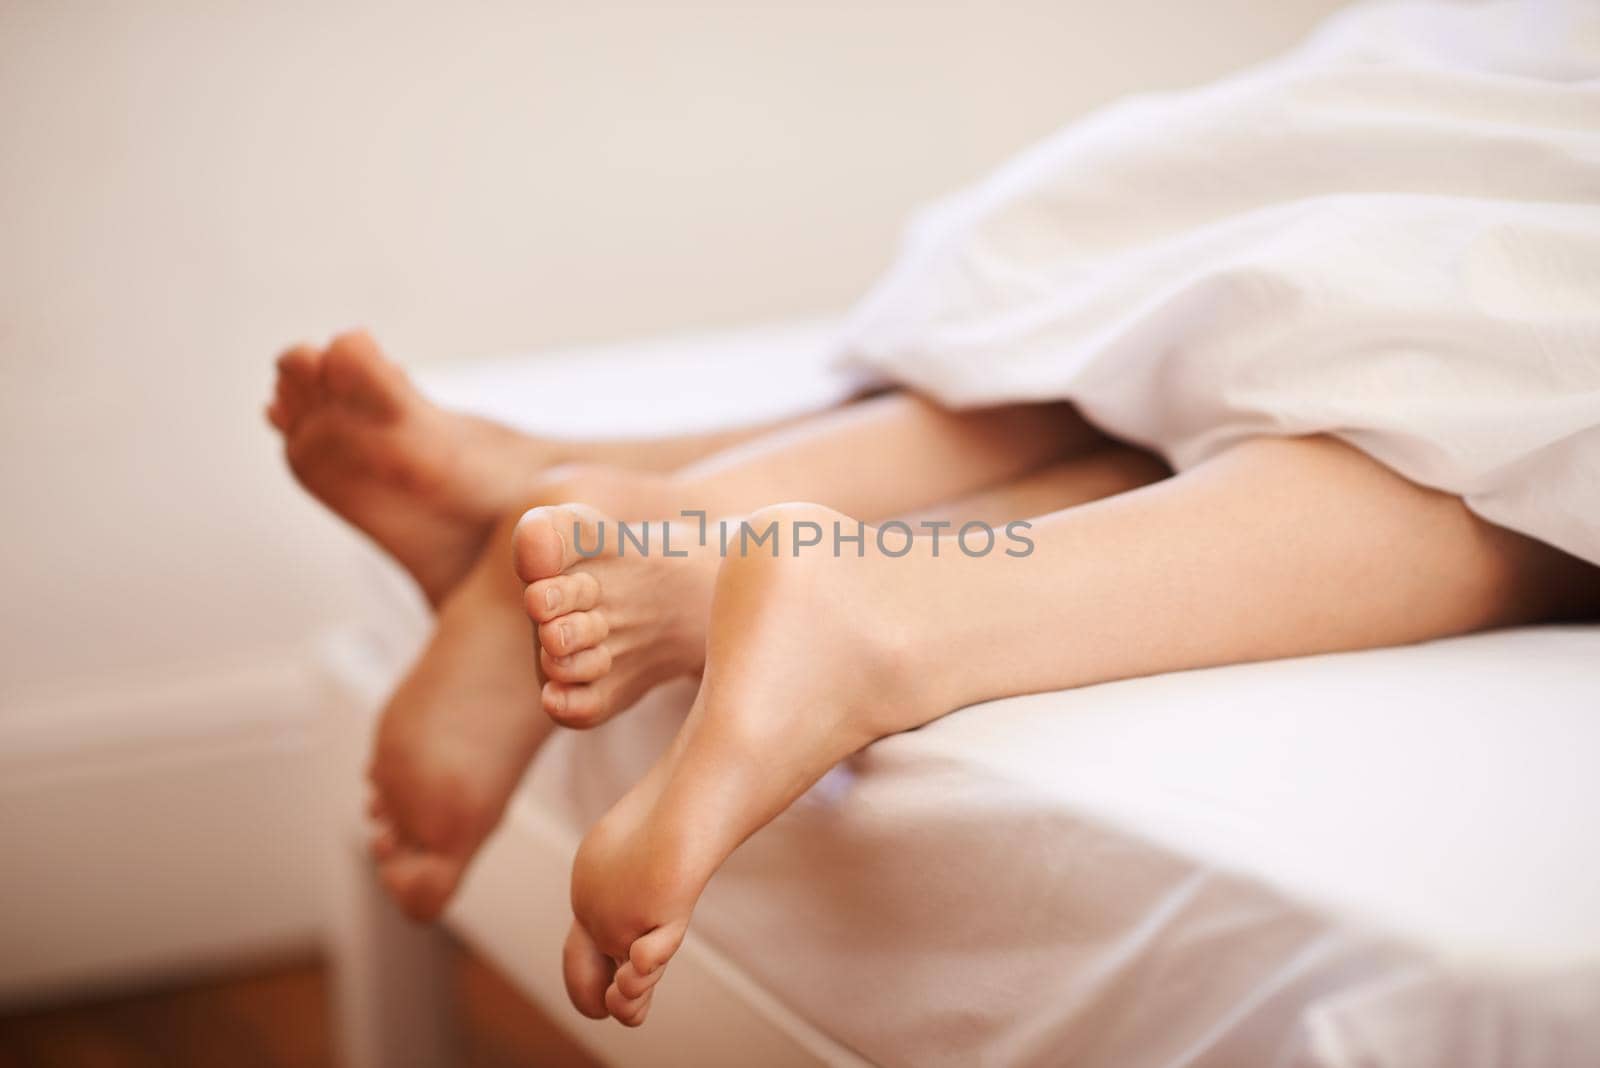 Cropped view of a couples feet as they lie in bed together.